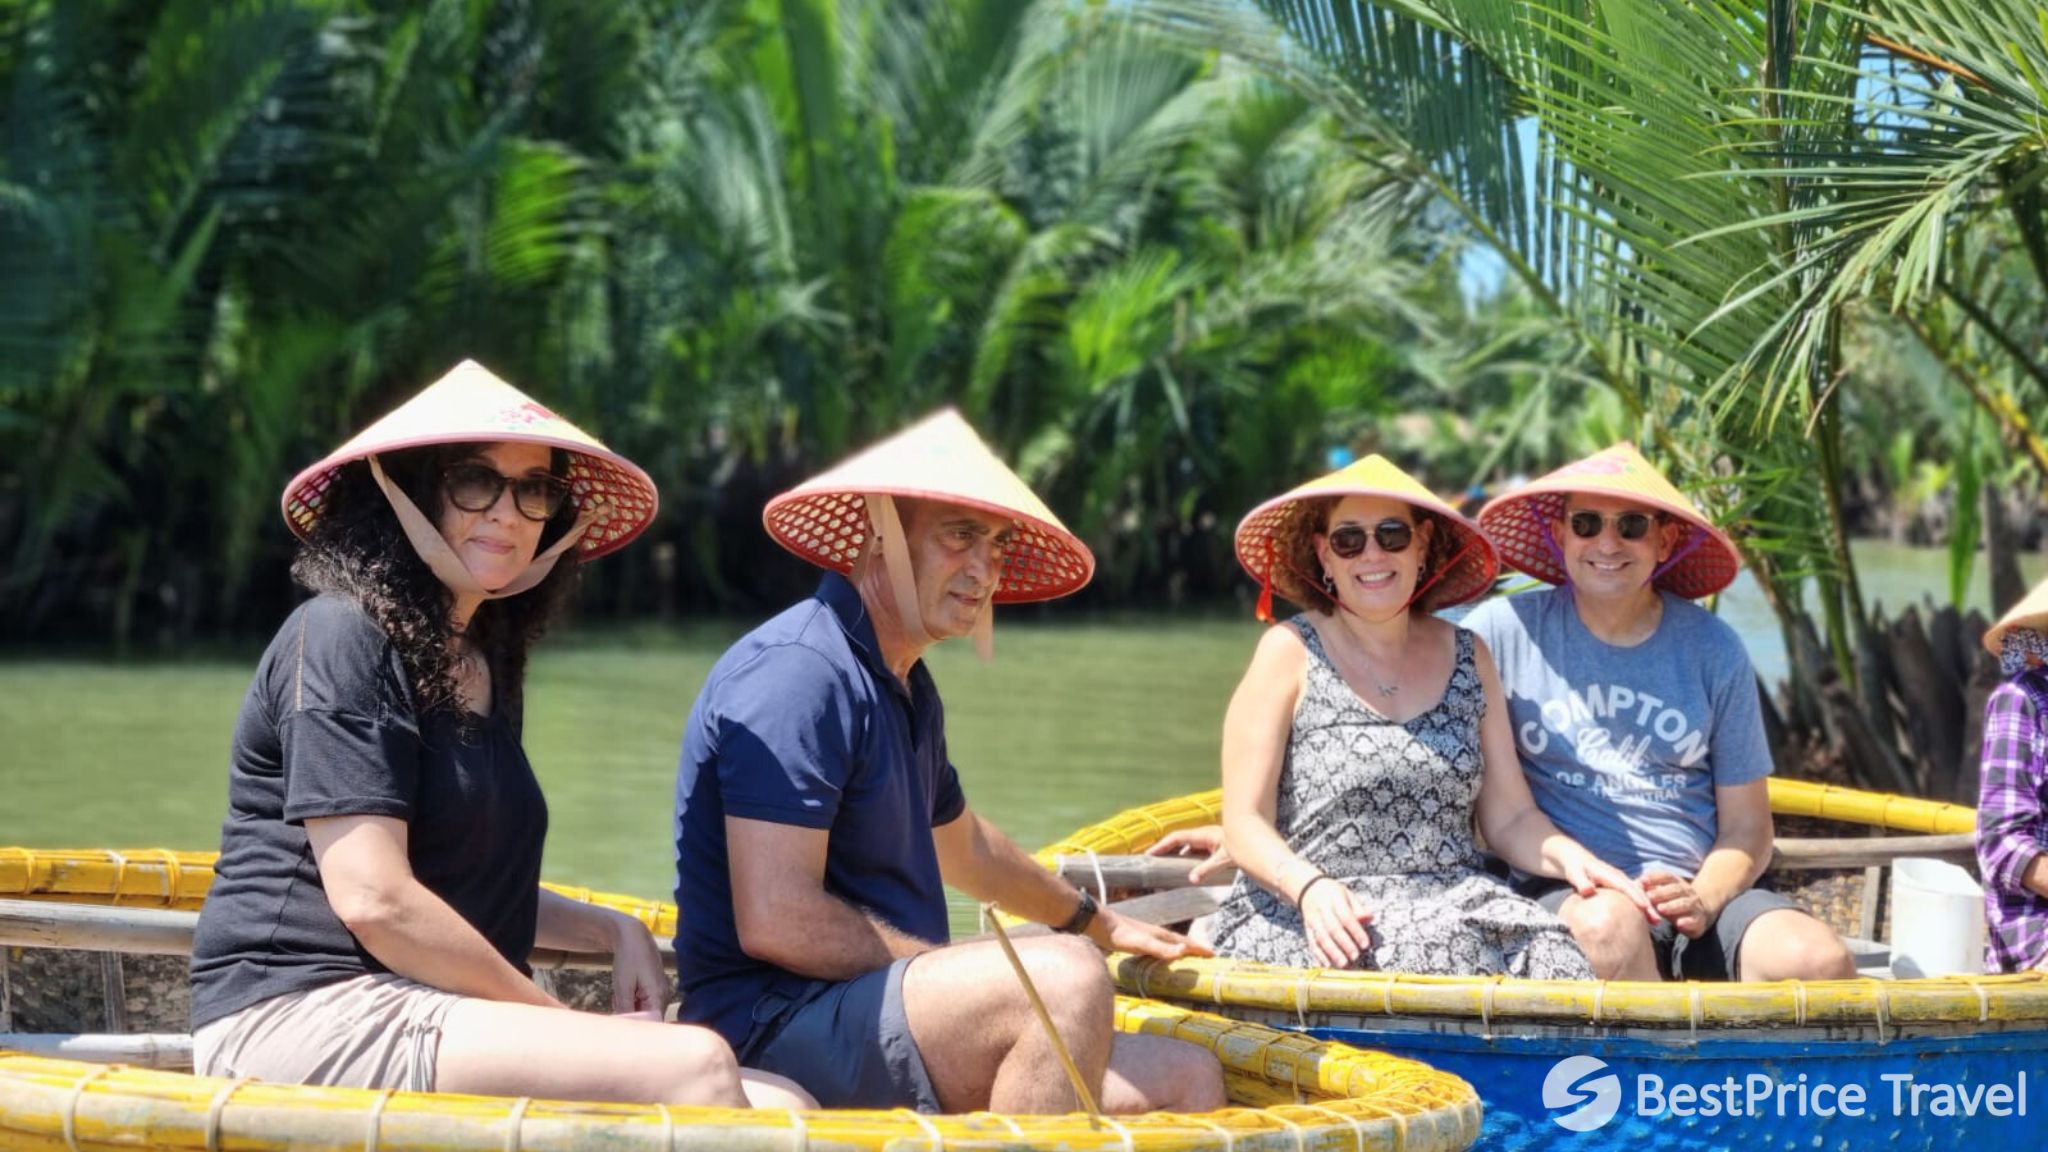 Day 8 Take A Basketboat Tour In Cam Thanh Village